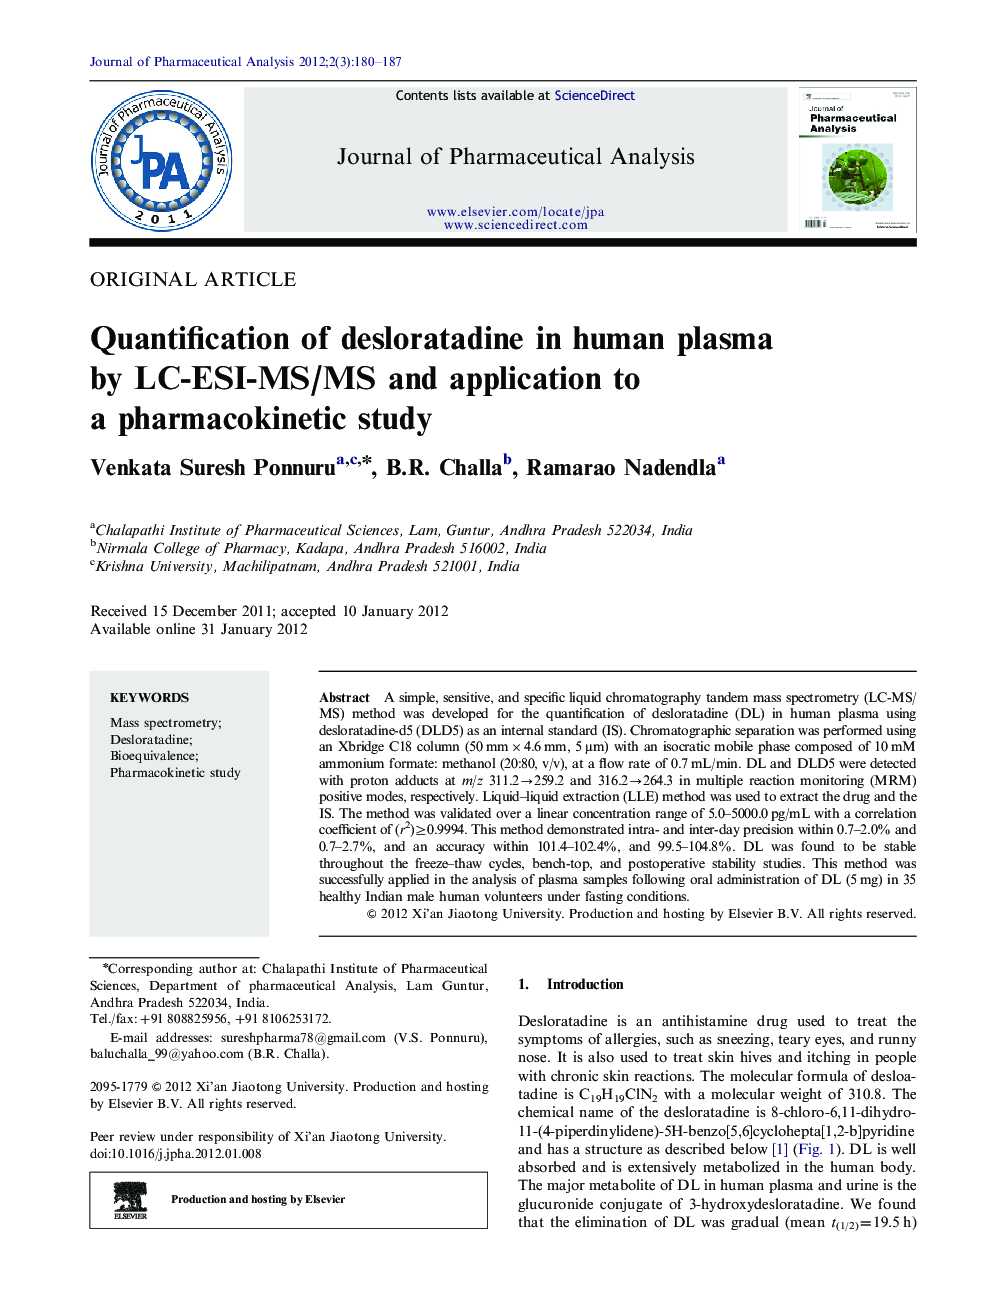 Quantification of desloratadine in human plasma by LC-ESI-MS/MS and application to a pharmacokinetic study